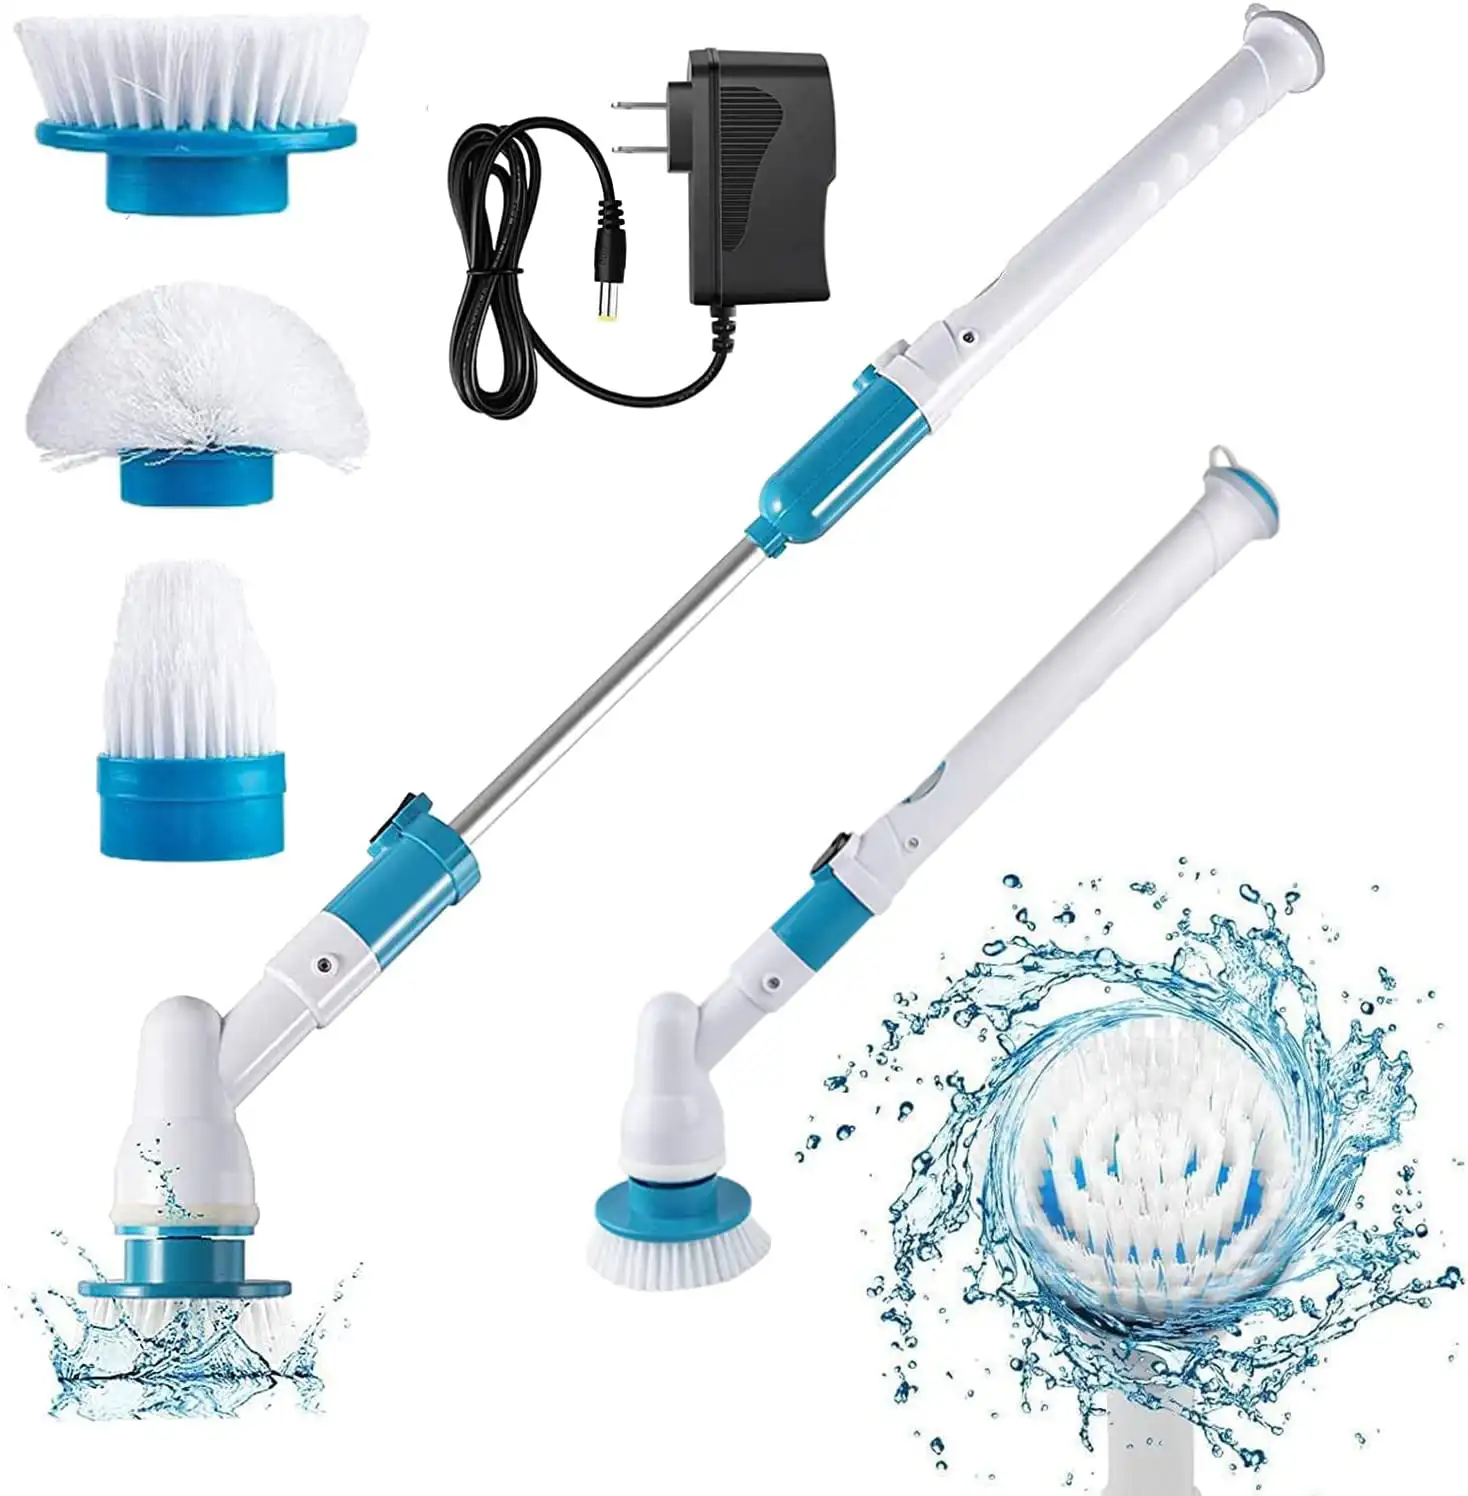 

Electric Spin Scrubber Cordless Power Scrubber Rechargeable Spin Cleaning Brushes with 3 Replaceable Brush Heads and 1 Extension